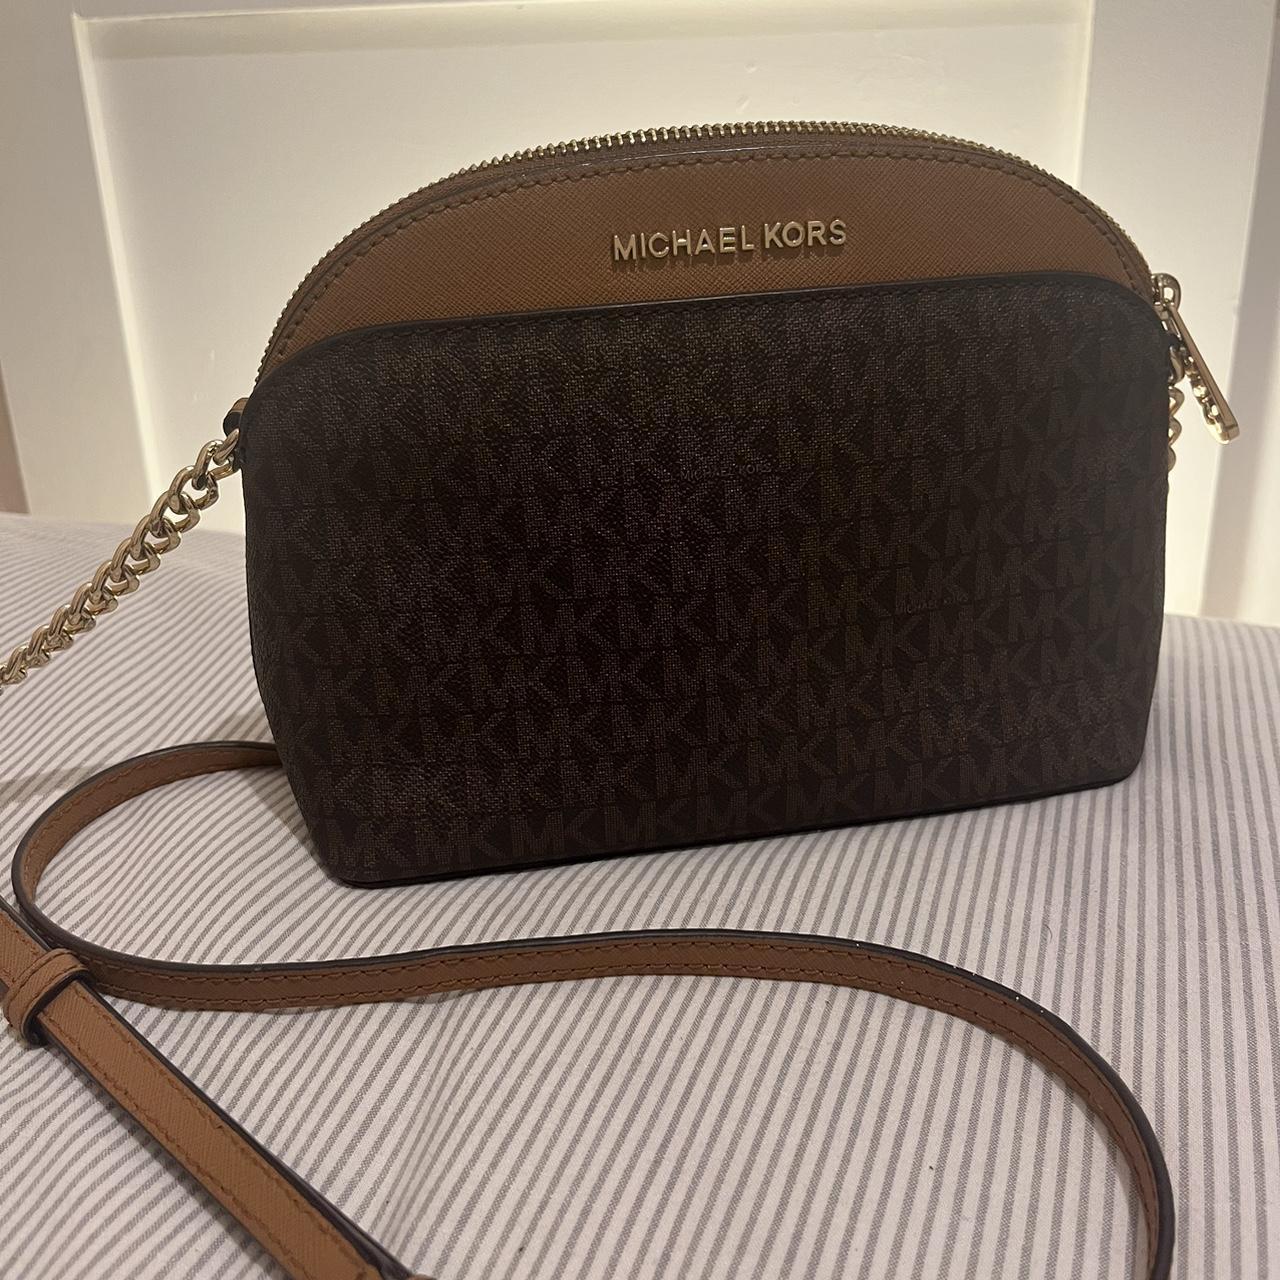 Authentic Michael Kors bag - Womens In great condition - Depop